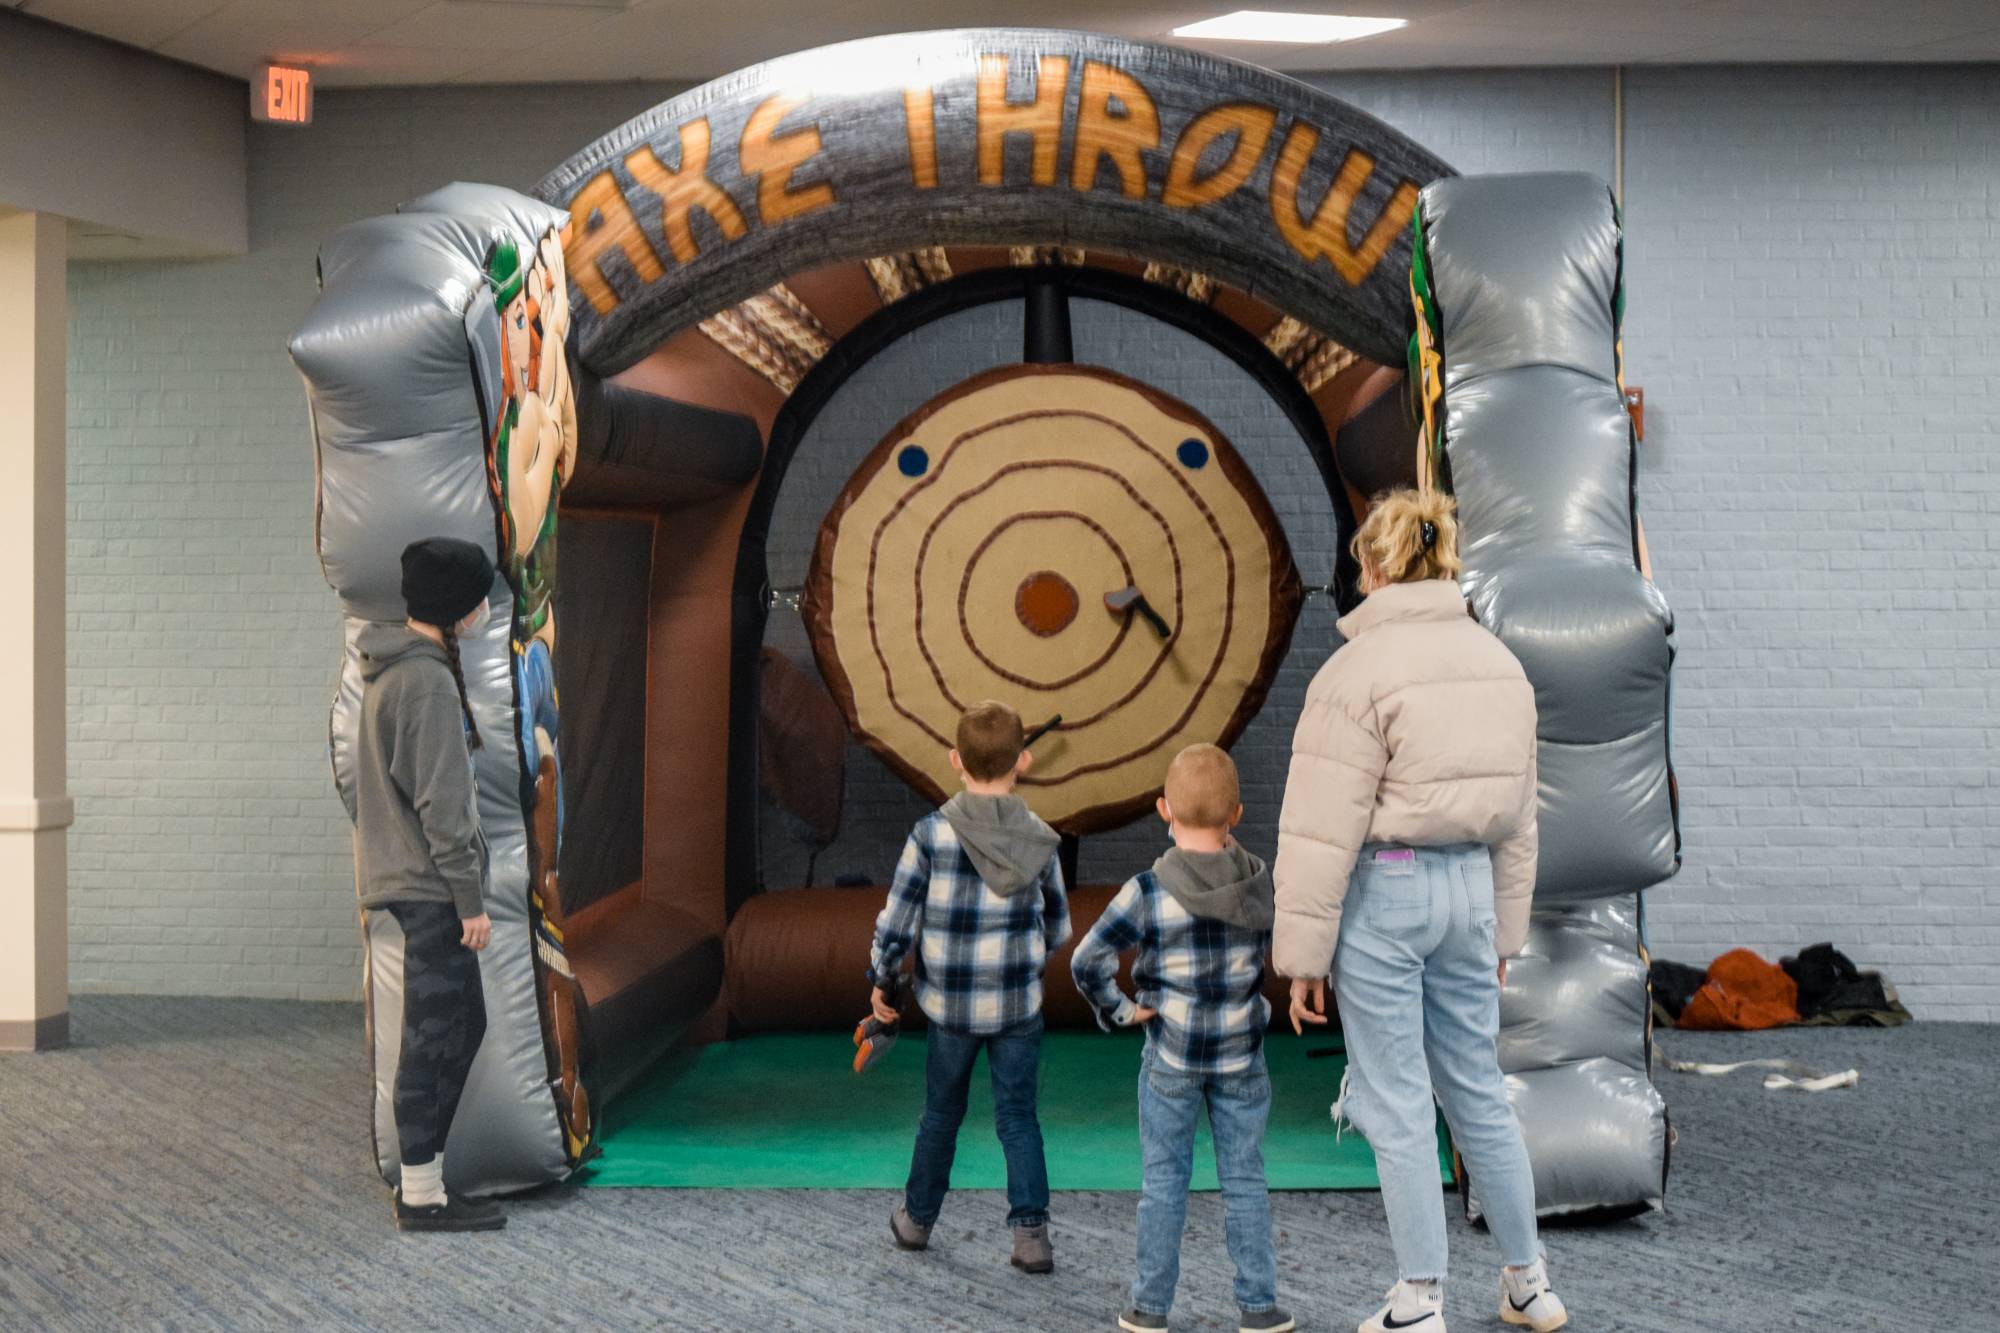 Kids throwing inflatable axes at inflatable target as others watch